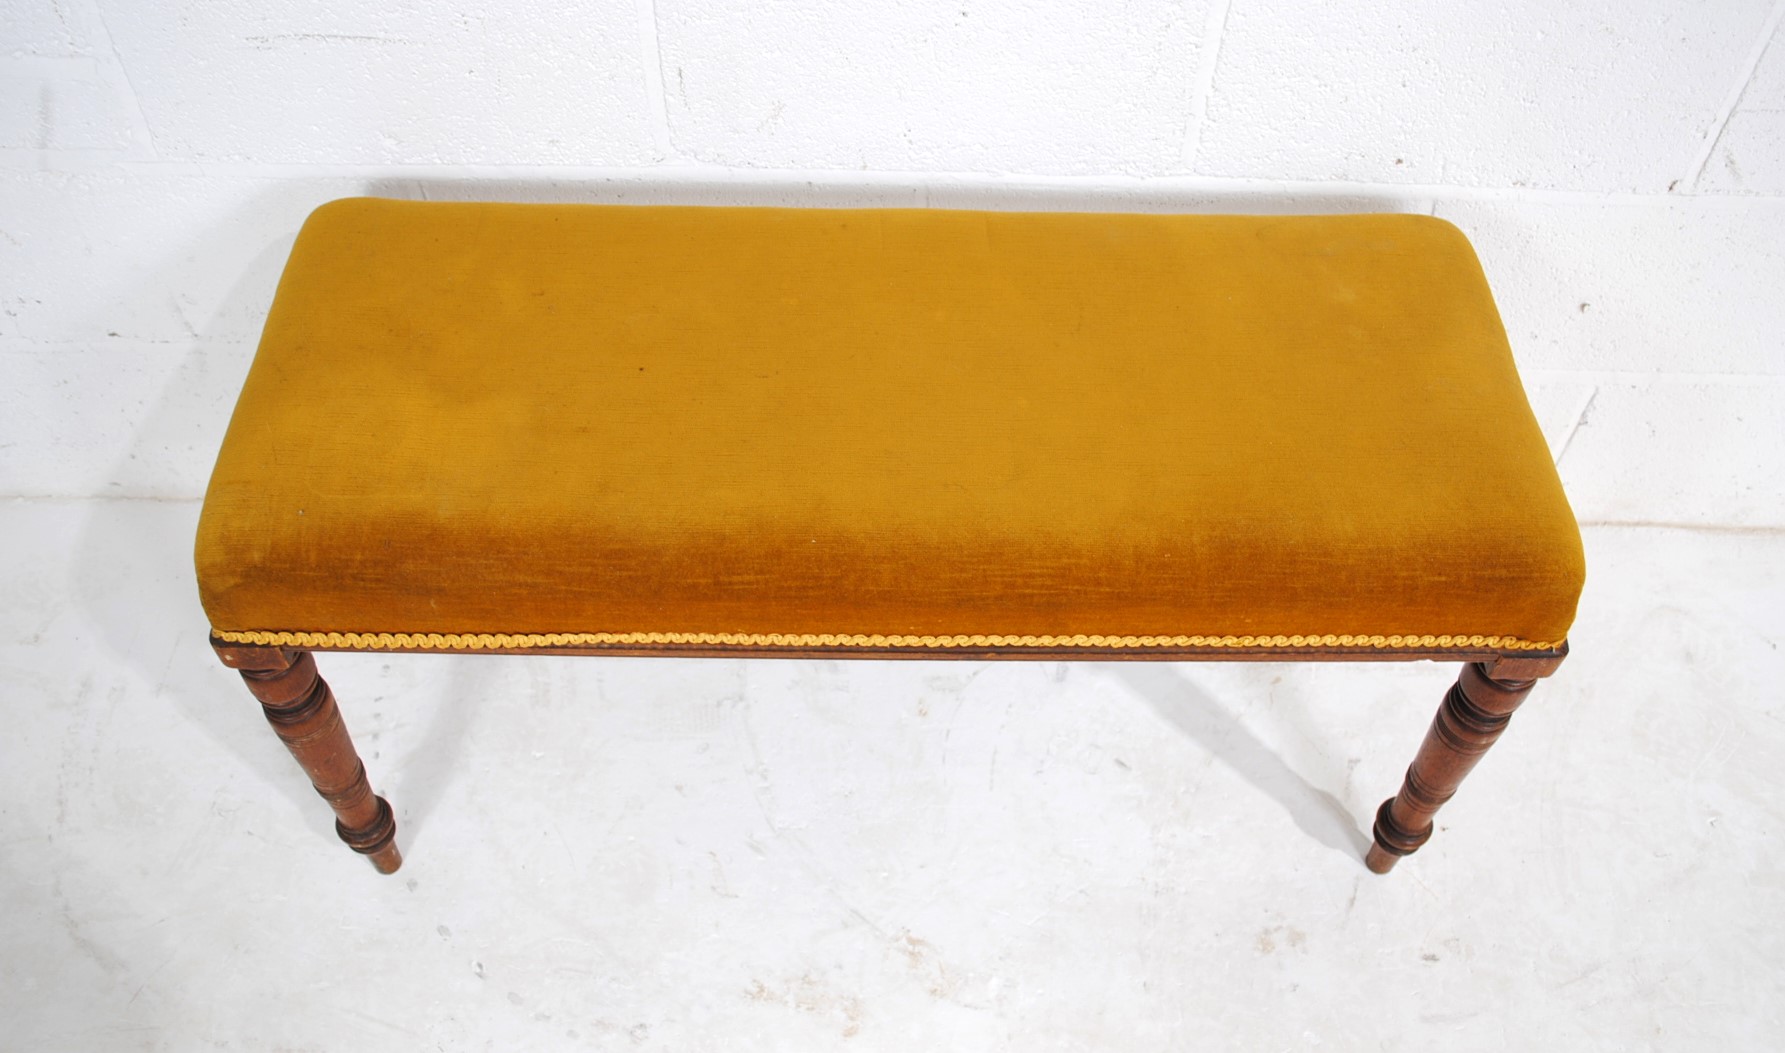 A Victorian upholstered duet stool, raised on turned mahogany legs - length 99cm, height 51cm - Image 4 of 5